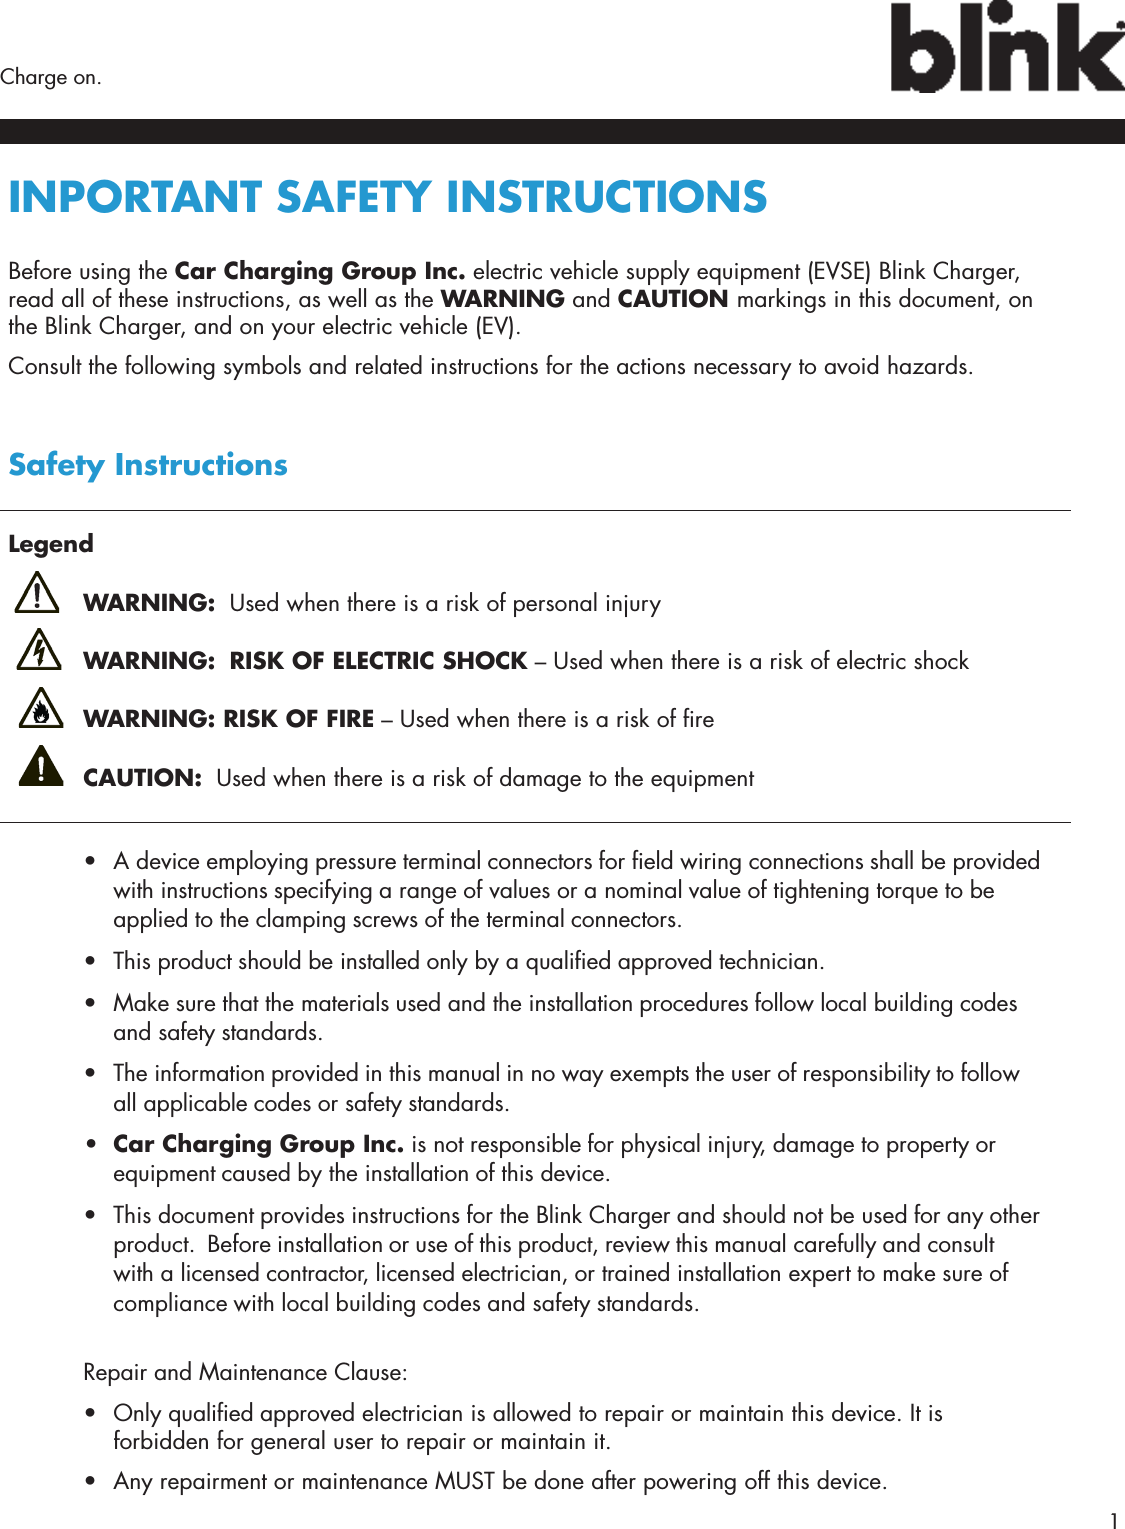        1Charge on.INPORTANT SAFETY INSTRUCTIONS Before using the Car Charging Group Inc. electric vehicle supply equipment (EVSE) Blink Charger, read all of these instructions, as well as the WARNING and CAUTION markings in this document, on the Blink Charger, and on your electric vehicle (EV).Consult the following symbols and related instructions for the actions necessary to avoid hazards.Safety InstructionsLegend WARNING:  Used when there is a risk of personal injury WARNING:  RISK OF ELECTRIC SHOCK – Used when there is a risk of electric shock WARNING: RISK OF FIRE – Used when there is a risk of re CAUTION:  Used when there is a risk of damage to the equipment•  A device employing pressure terminal connectors for eld wiring connections shall be provided with instructions specifying a range of values or a nominal value of tightening torque to be applied to the clamping screws of the terminal connectors.•  This product should be installed only by a qualied approved technician.•  Make sure that the materials used and the installation procedures follow local building codes and safety standards.•  The information provided in this manual in no way exempts the user of responsibility to follow all applicable codes or safety standards.•  Car Charging Group Inc. is not responsible for physical injury, damage to property or equipment caused by the installation of this device.•  This document provides instructions for the Blink Charger and should not be used for any other product.  Before installation or use of this product, review this manual carefully and consult with a licensed contractor, licensed electrician, or trained installation expert to make sure of compliance with local building codes and safety standards. Repair and Maintenance Clause:•  Only qualied approved electrician is allowed to repair or maintain this device. It is forbidden for general user to repair or maintain it.•  Any repairment or maintenance MUST be done after powering off this device.